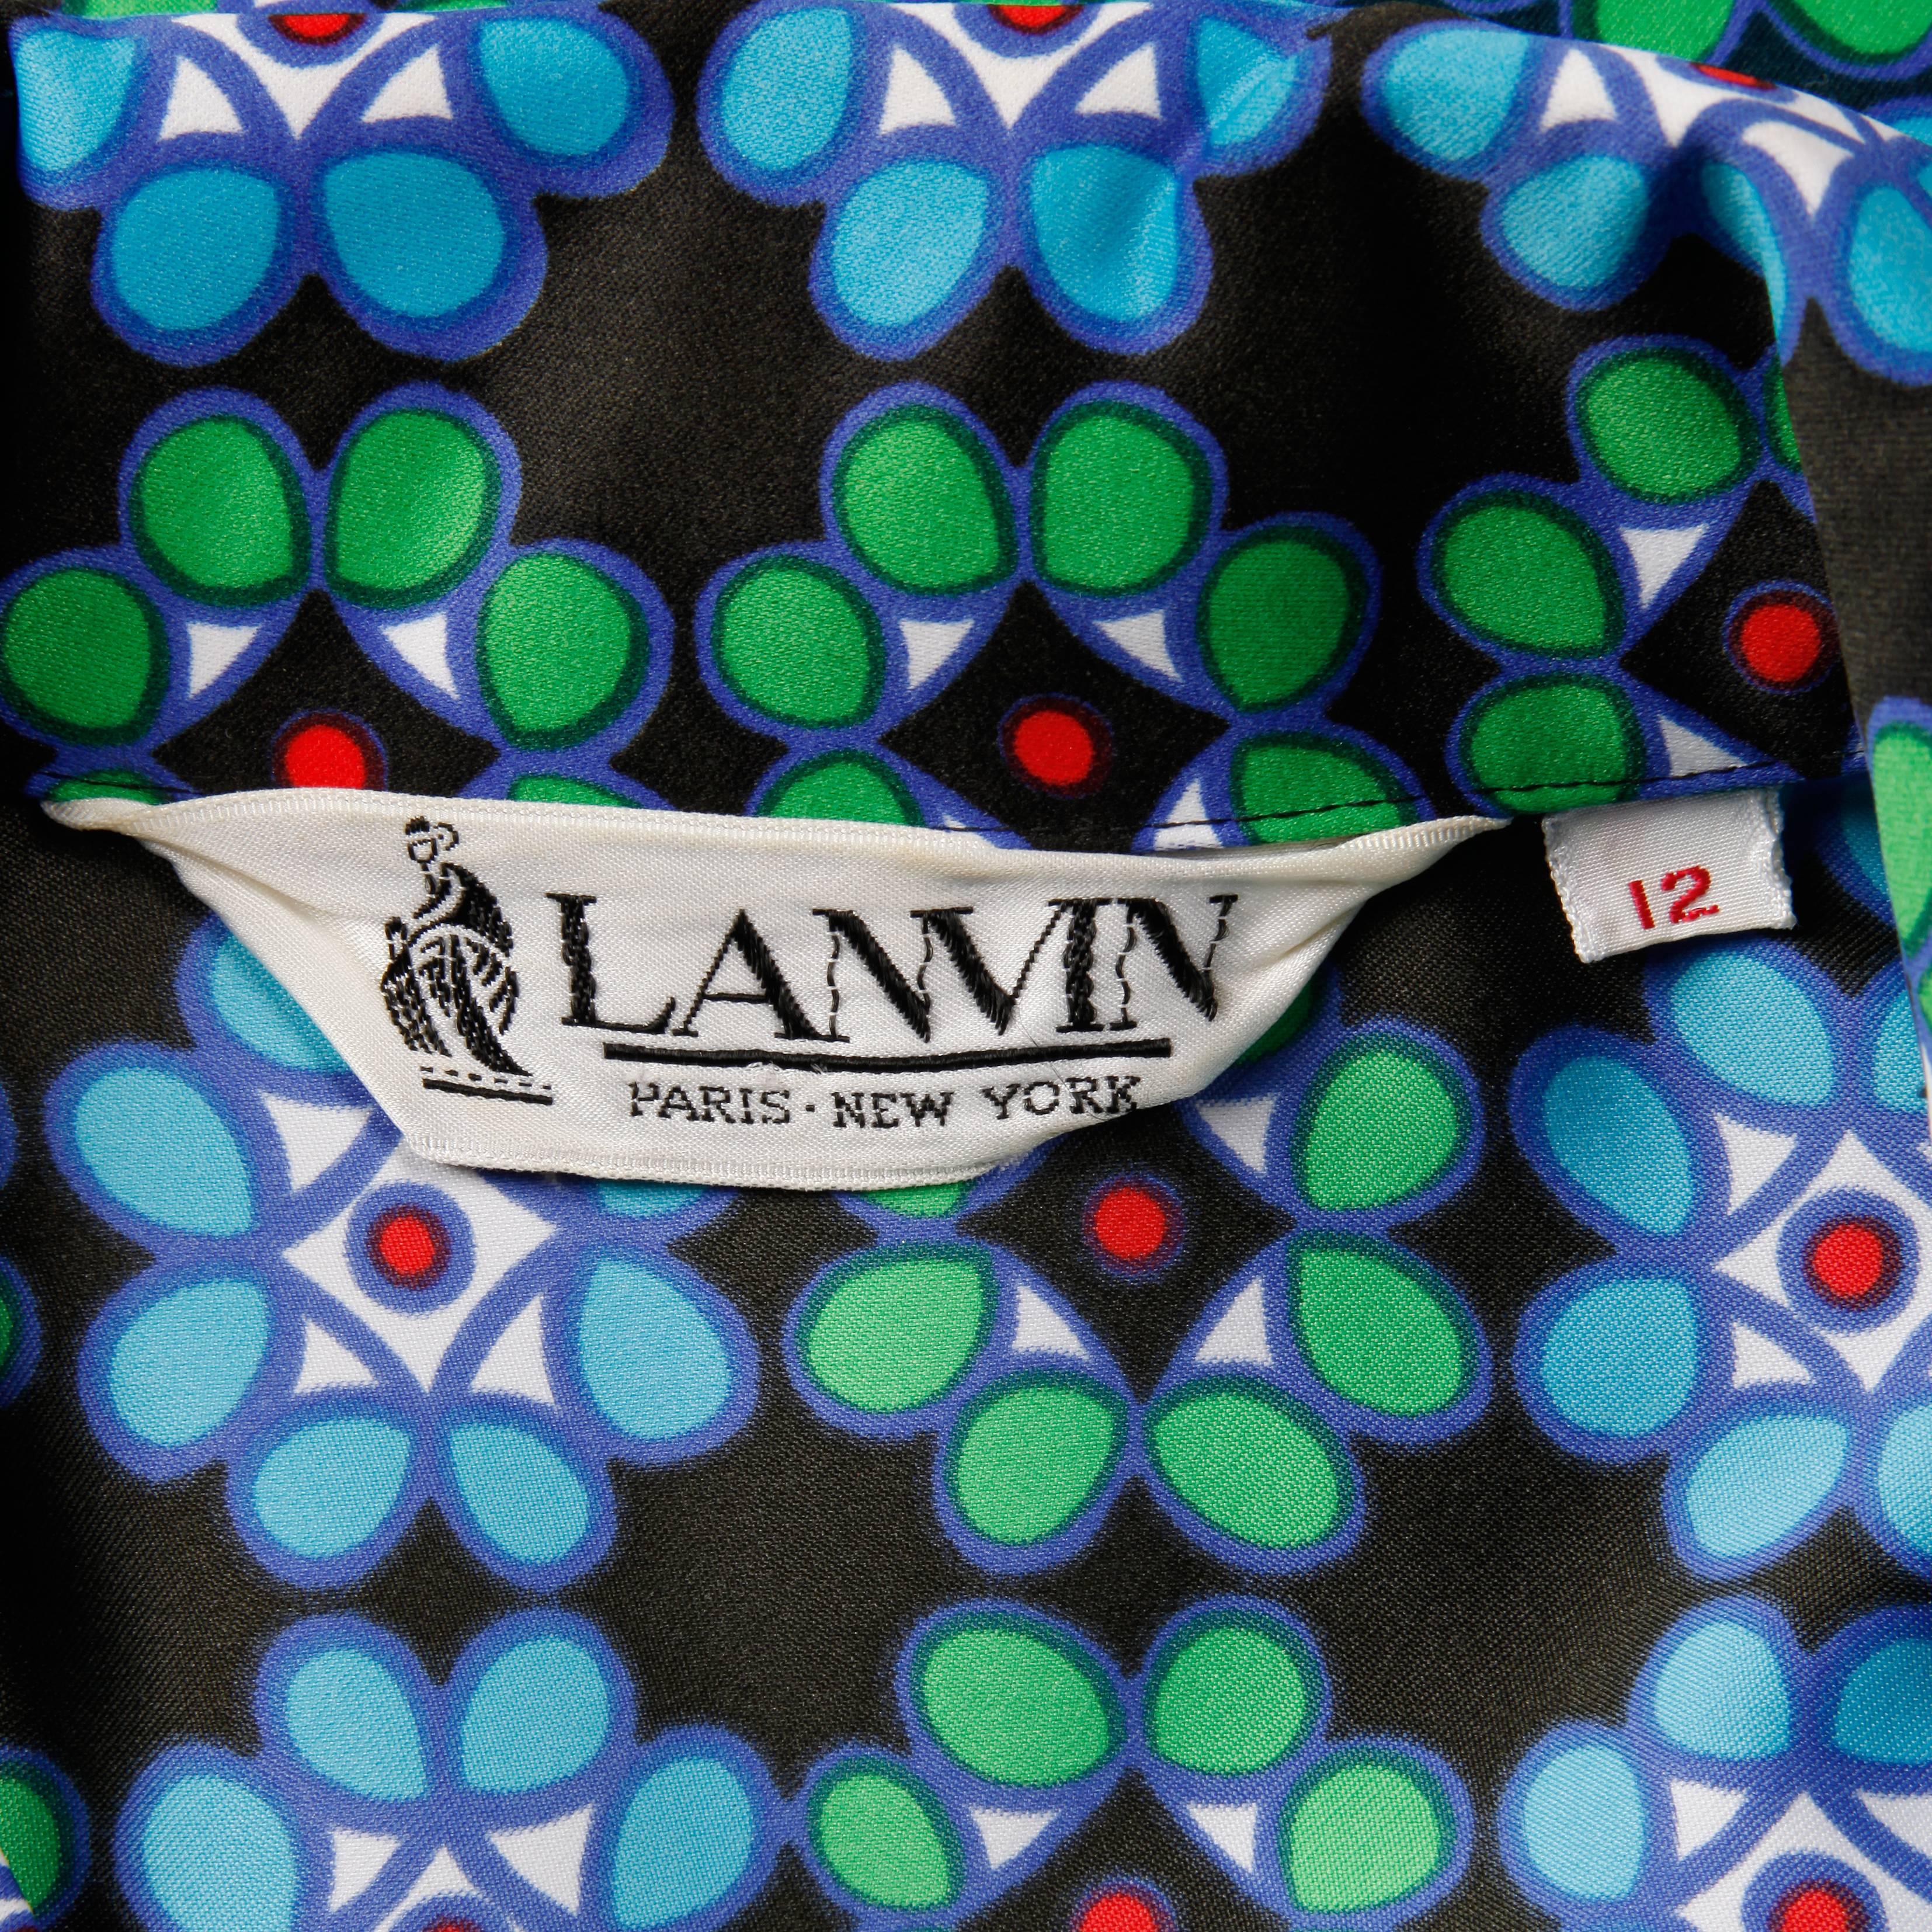 Incredible 1970s vintage shirt dress by Lanvin with a colorful geometric op art print. Unlined with front button closure and tie belt at waist. The marked size is 12, and the dress fits like a modern size large. The bust measures 39